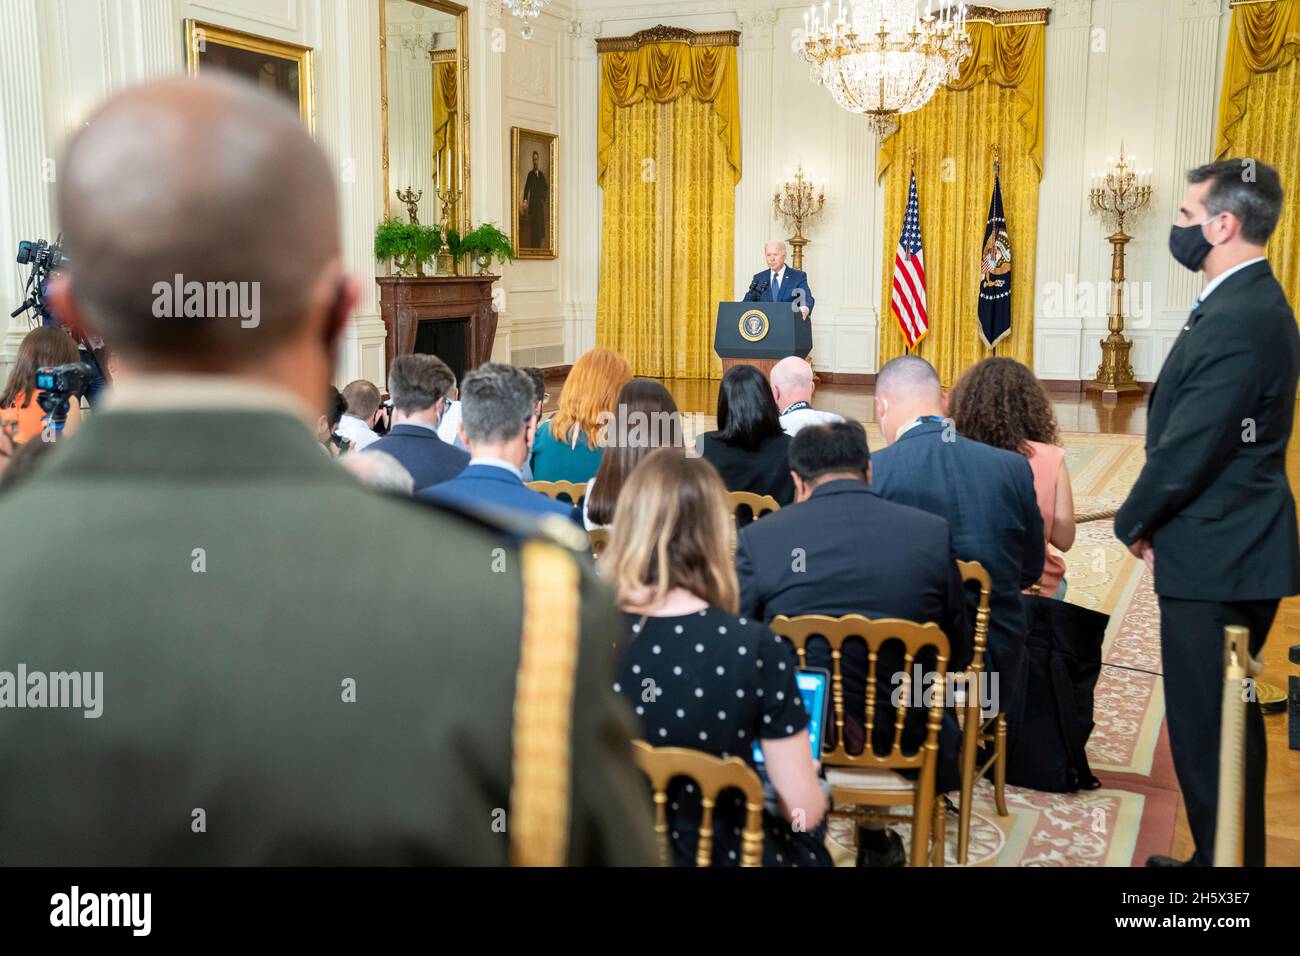 Washington, United States. 26 August, 2021. U.S. President Joe Biden delivers remarks on the terrorist bombings that killed 13 U.S. service members in the East Room of the White House August 26, 2021 in Washington, D.C. Credit: Adam Schultz/White House Photo/Alamy Live News Stock Photo